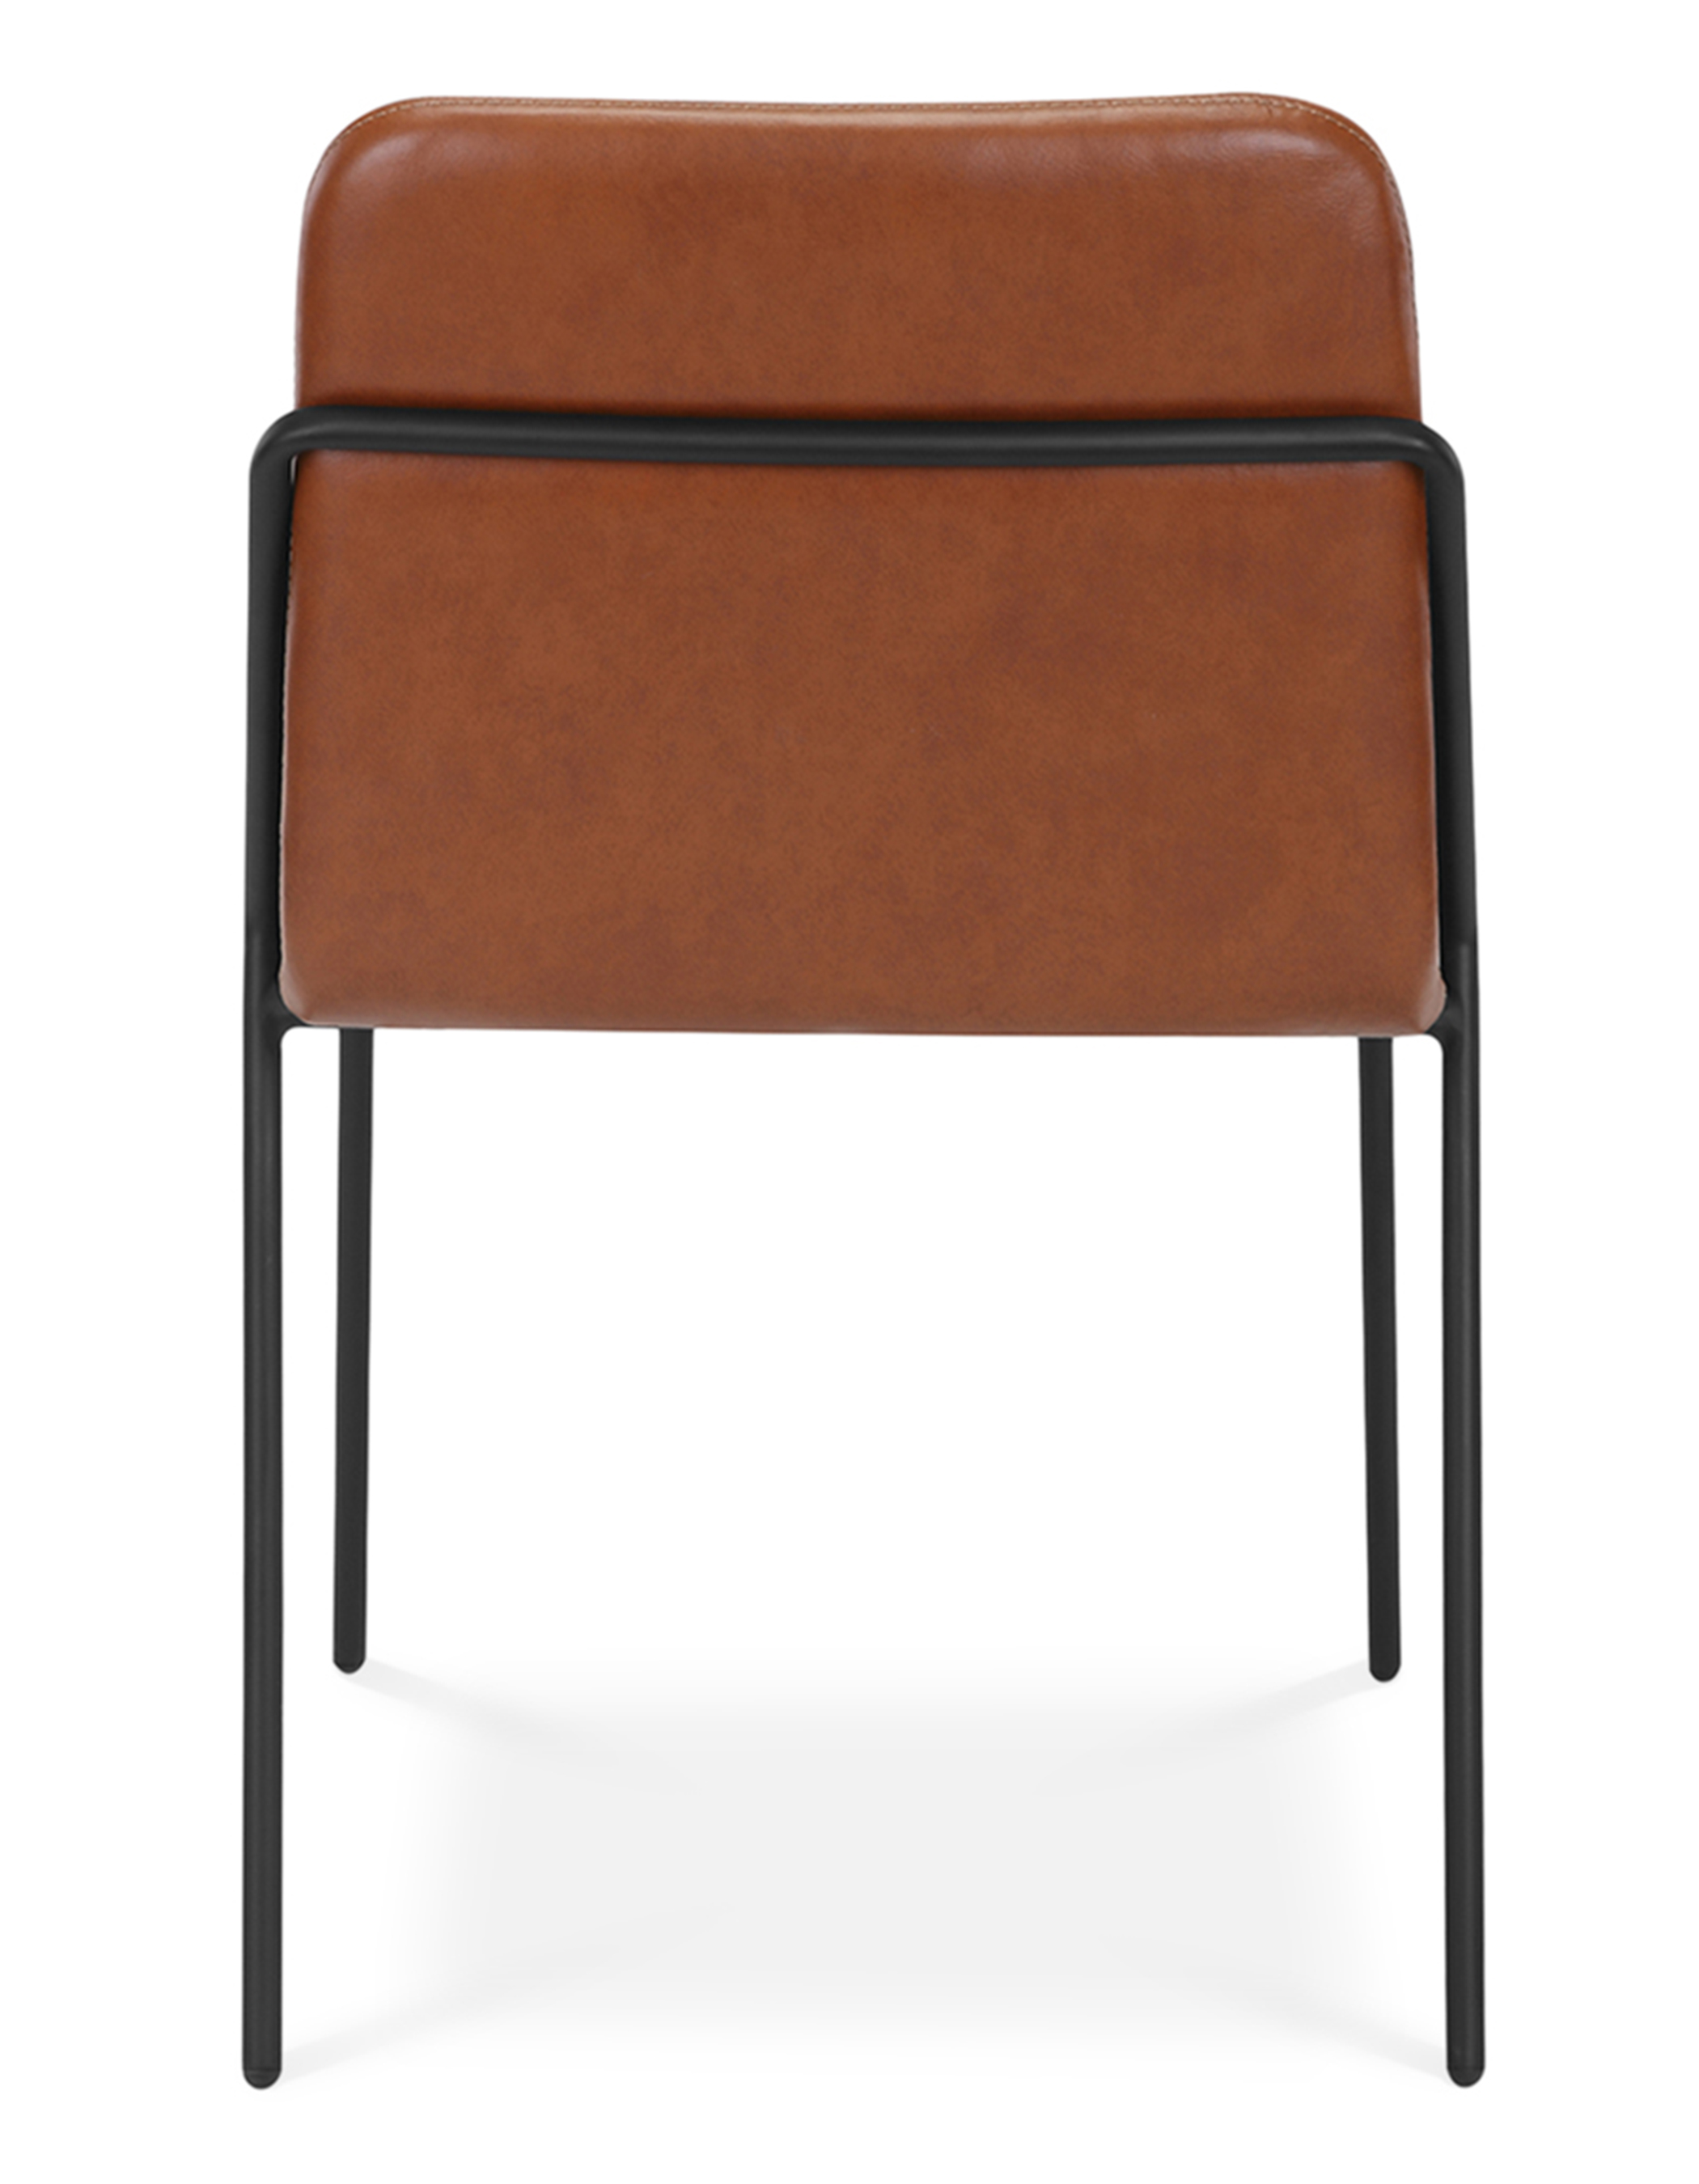 WS - Sling side chair - Upholstered PU leather (Back)